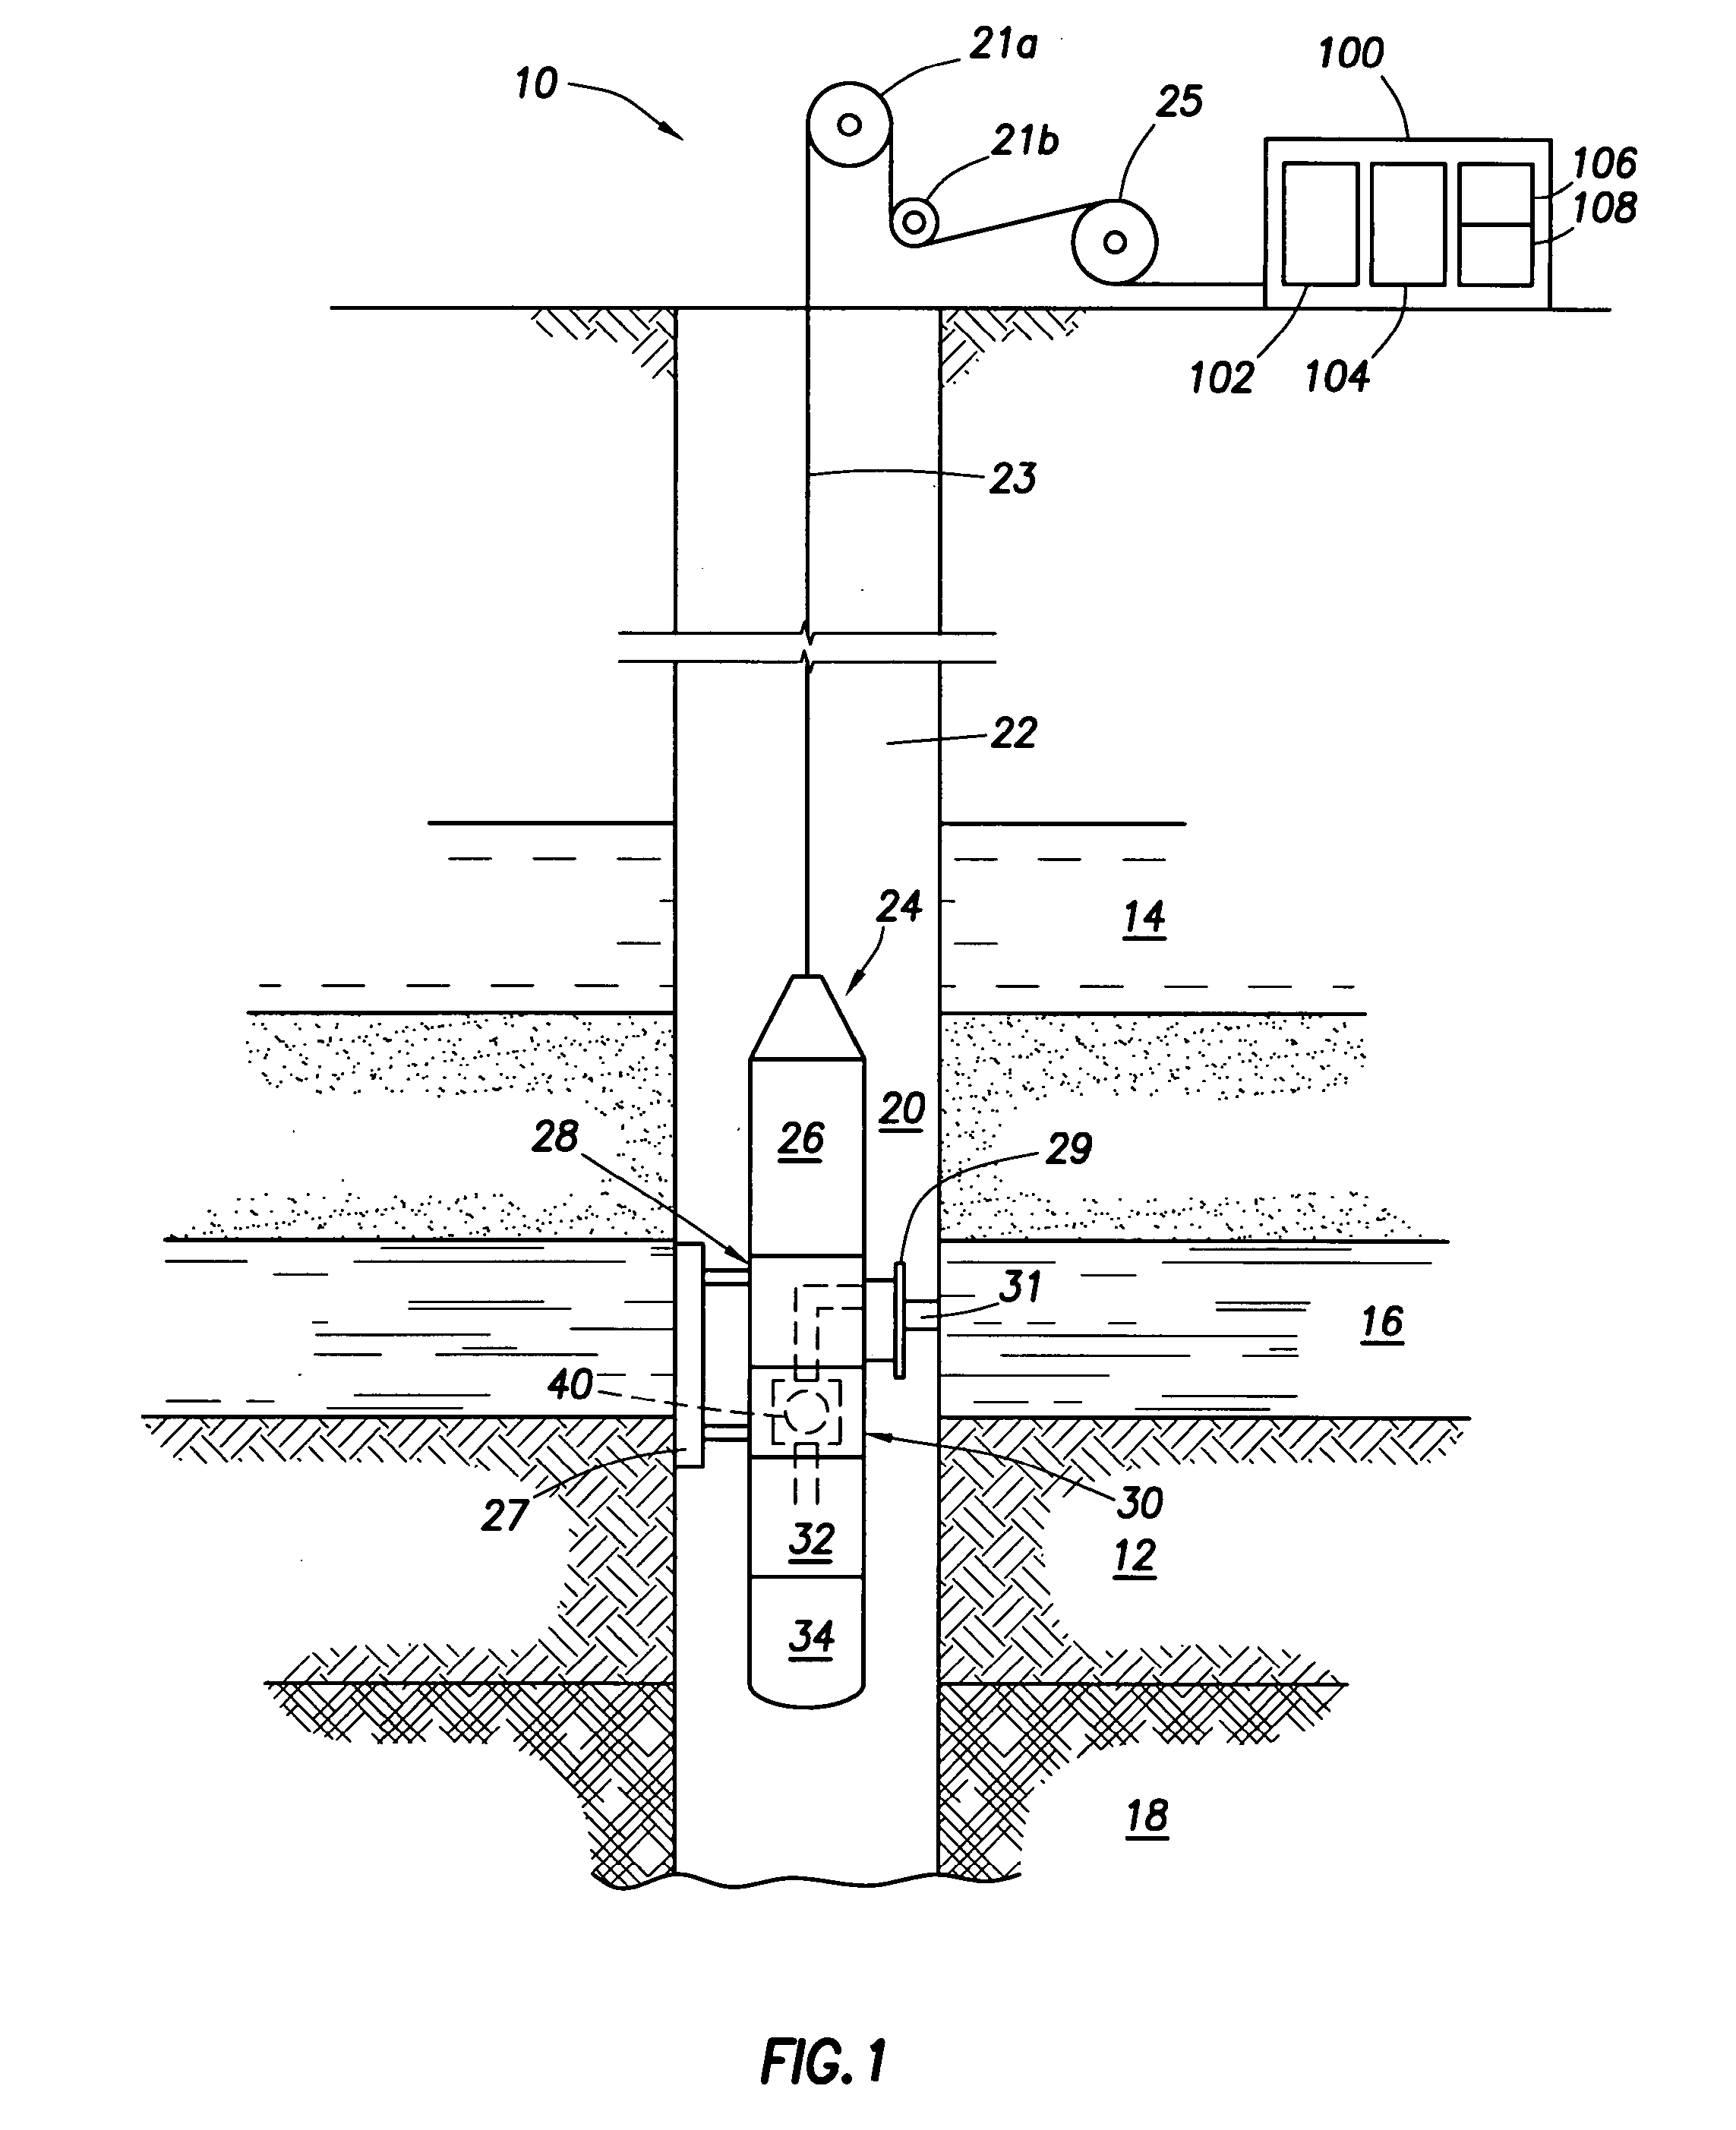 Terahertz analysis of a fluid from an earth formation using a downhole tool